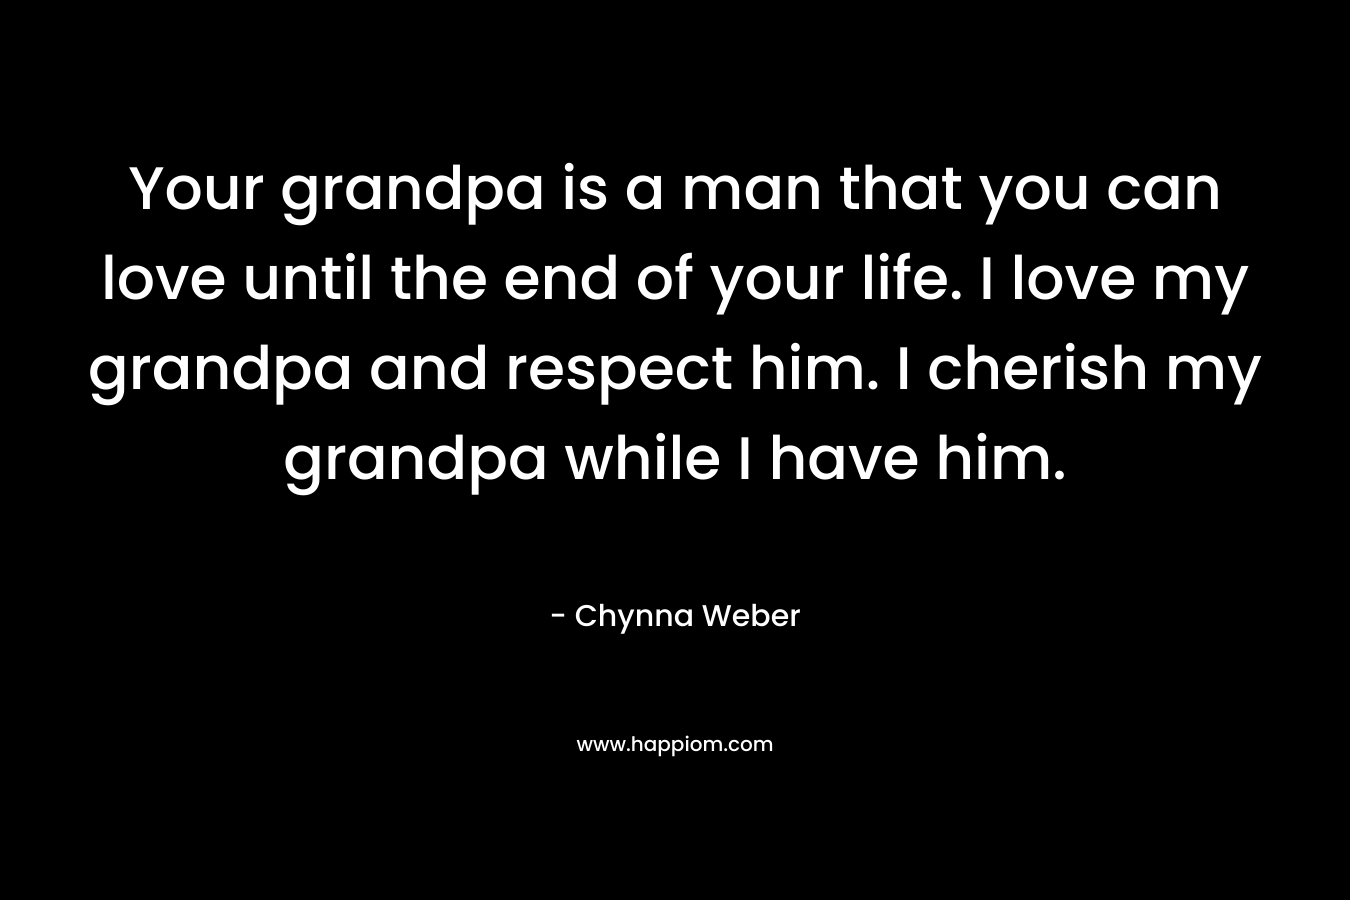 Your grandpa is a man that you can love until the end of your life. I love my grandpa and respect him. I cherish my grandpa while I have him.